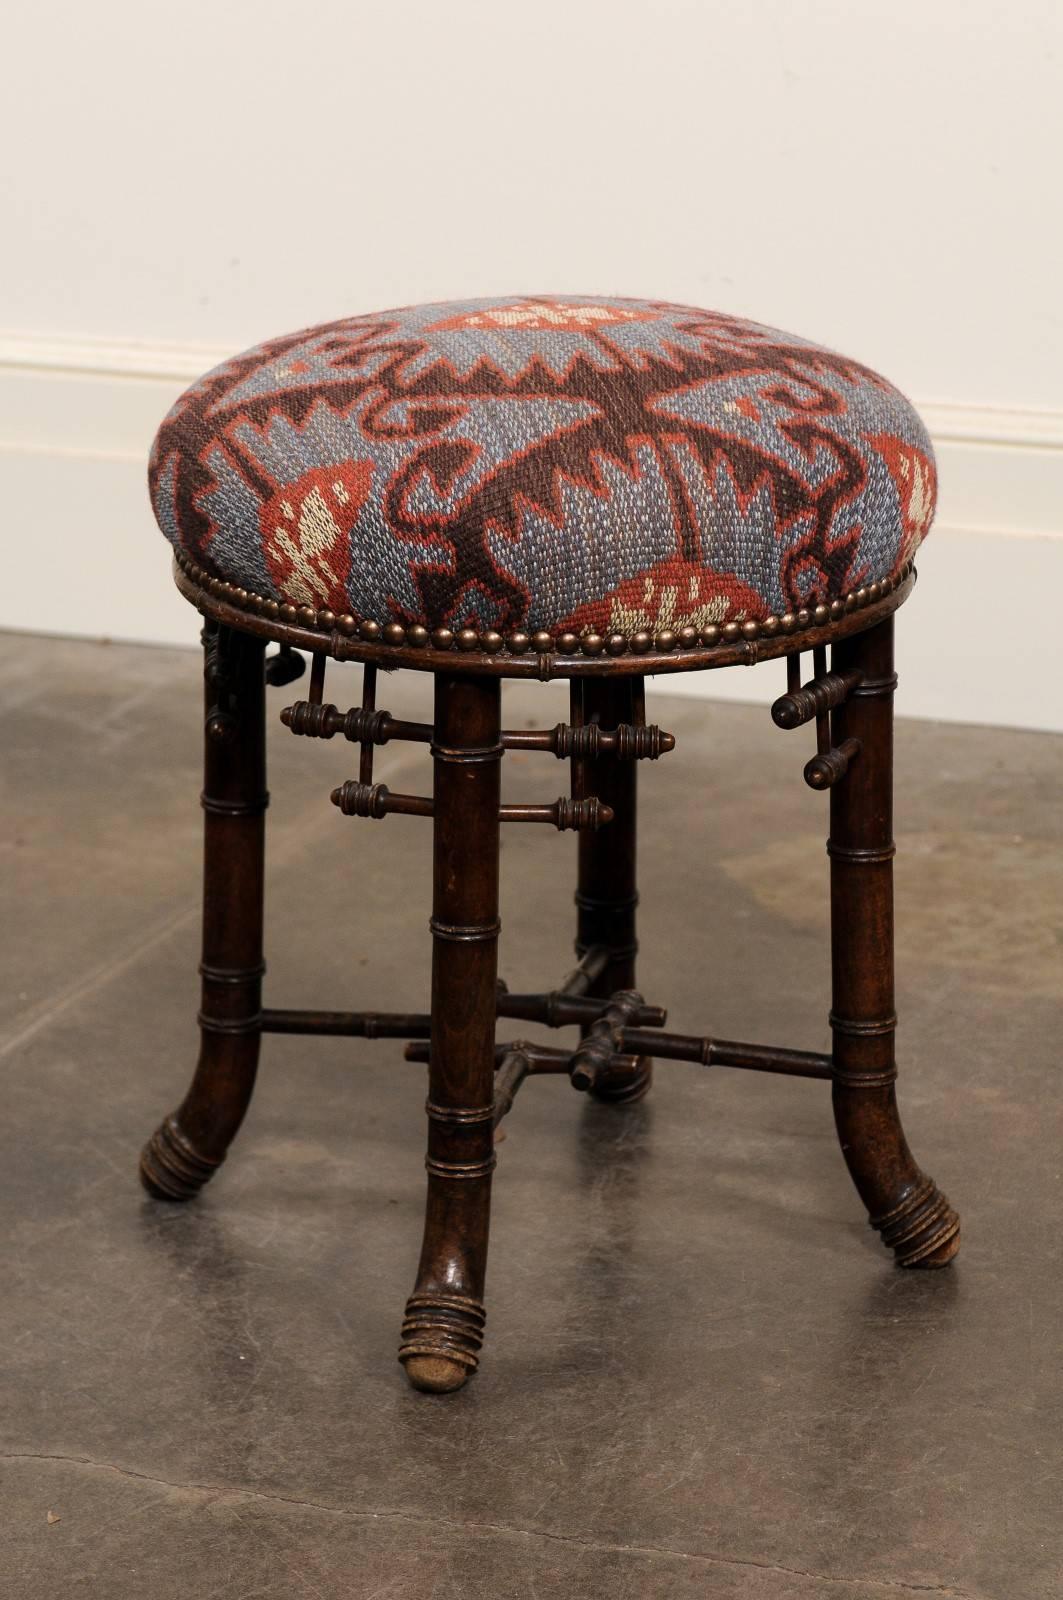 This French turn of the century Chinese Chippendale style dark walnut stool features a circular upholstered seat over an intricate base. The four splayed legs are delicately decorated with geometric motifs and joined together by an exquisite cross